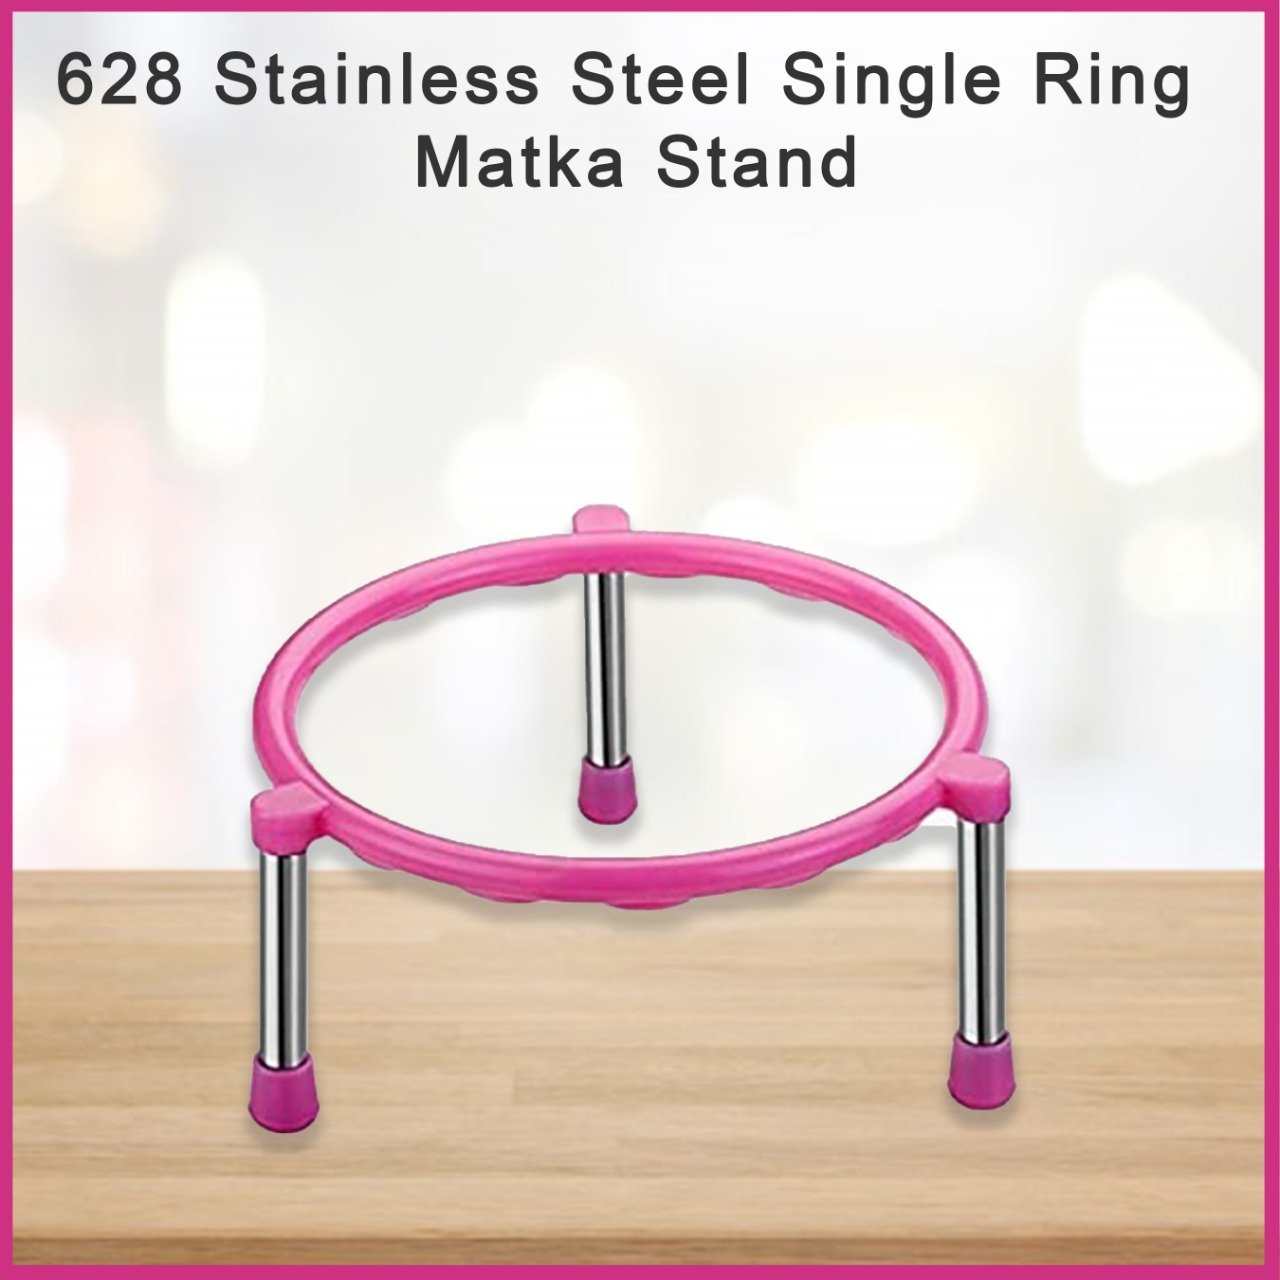 0628 Stainless Steel Single Ring Matka Stand - SkyShopy